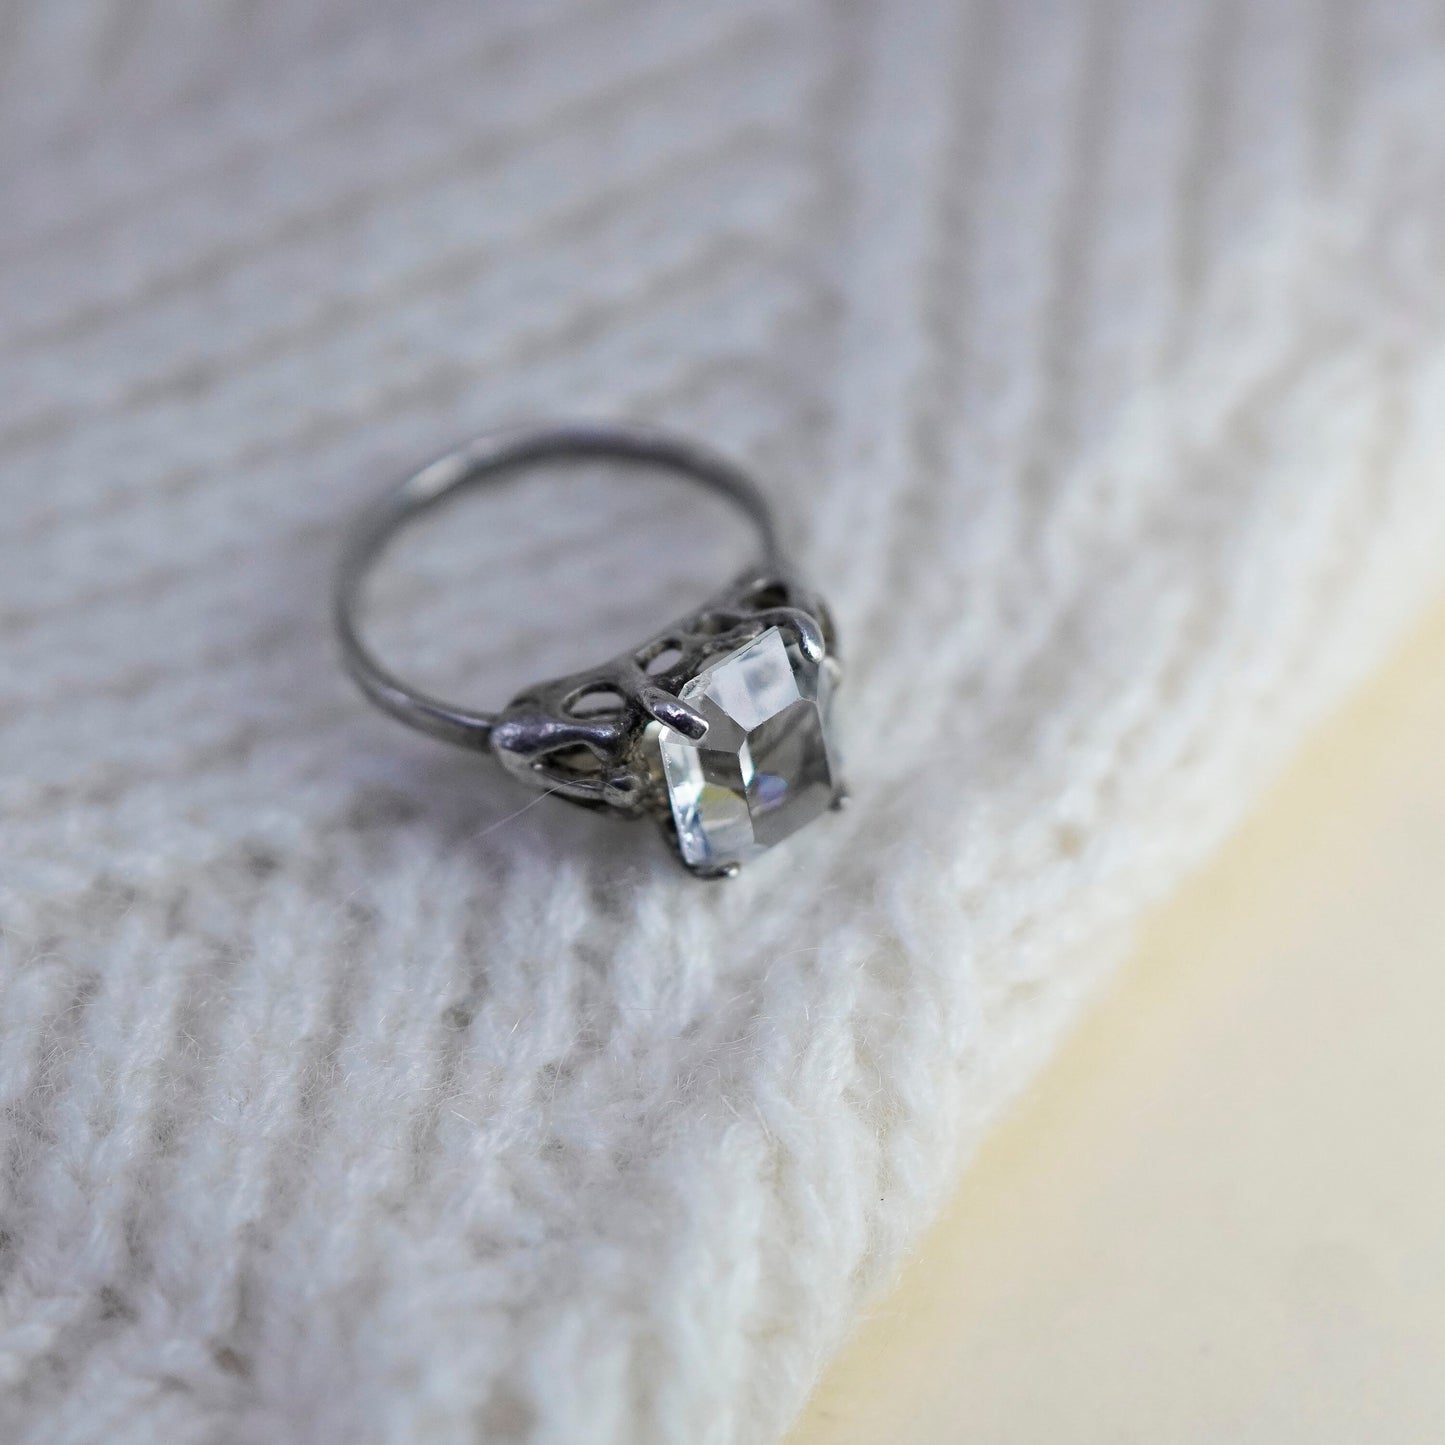 Size 5.5, vintage Sarah COV Sterling 925 silver ring with cz